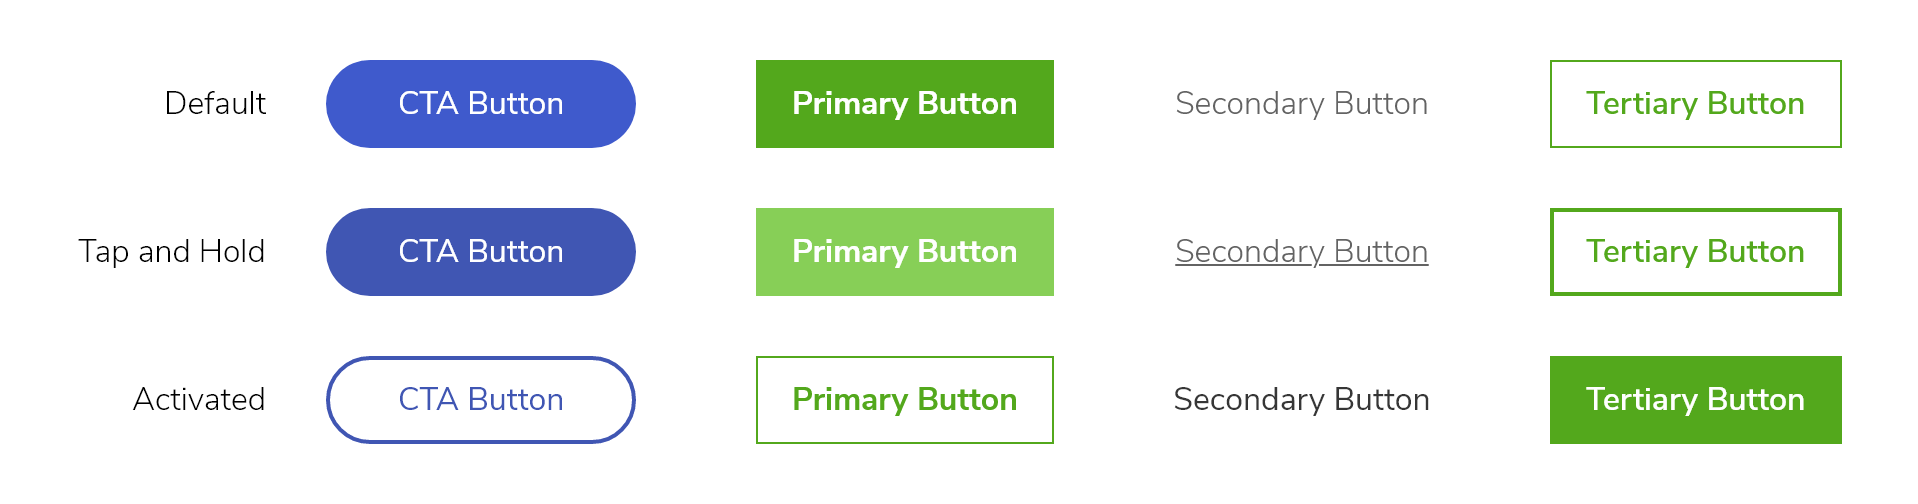 The button library of the application showing the style guide for primary, secondary, and tertiary buttons